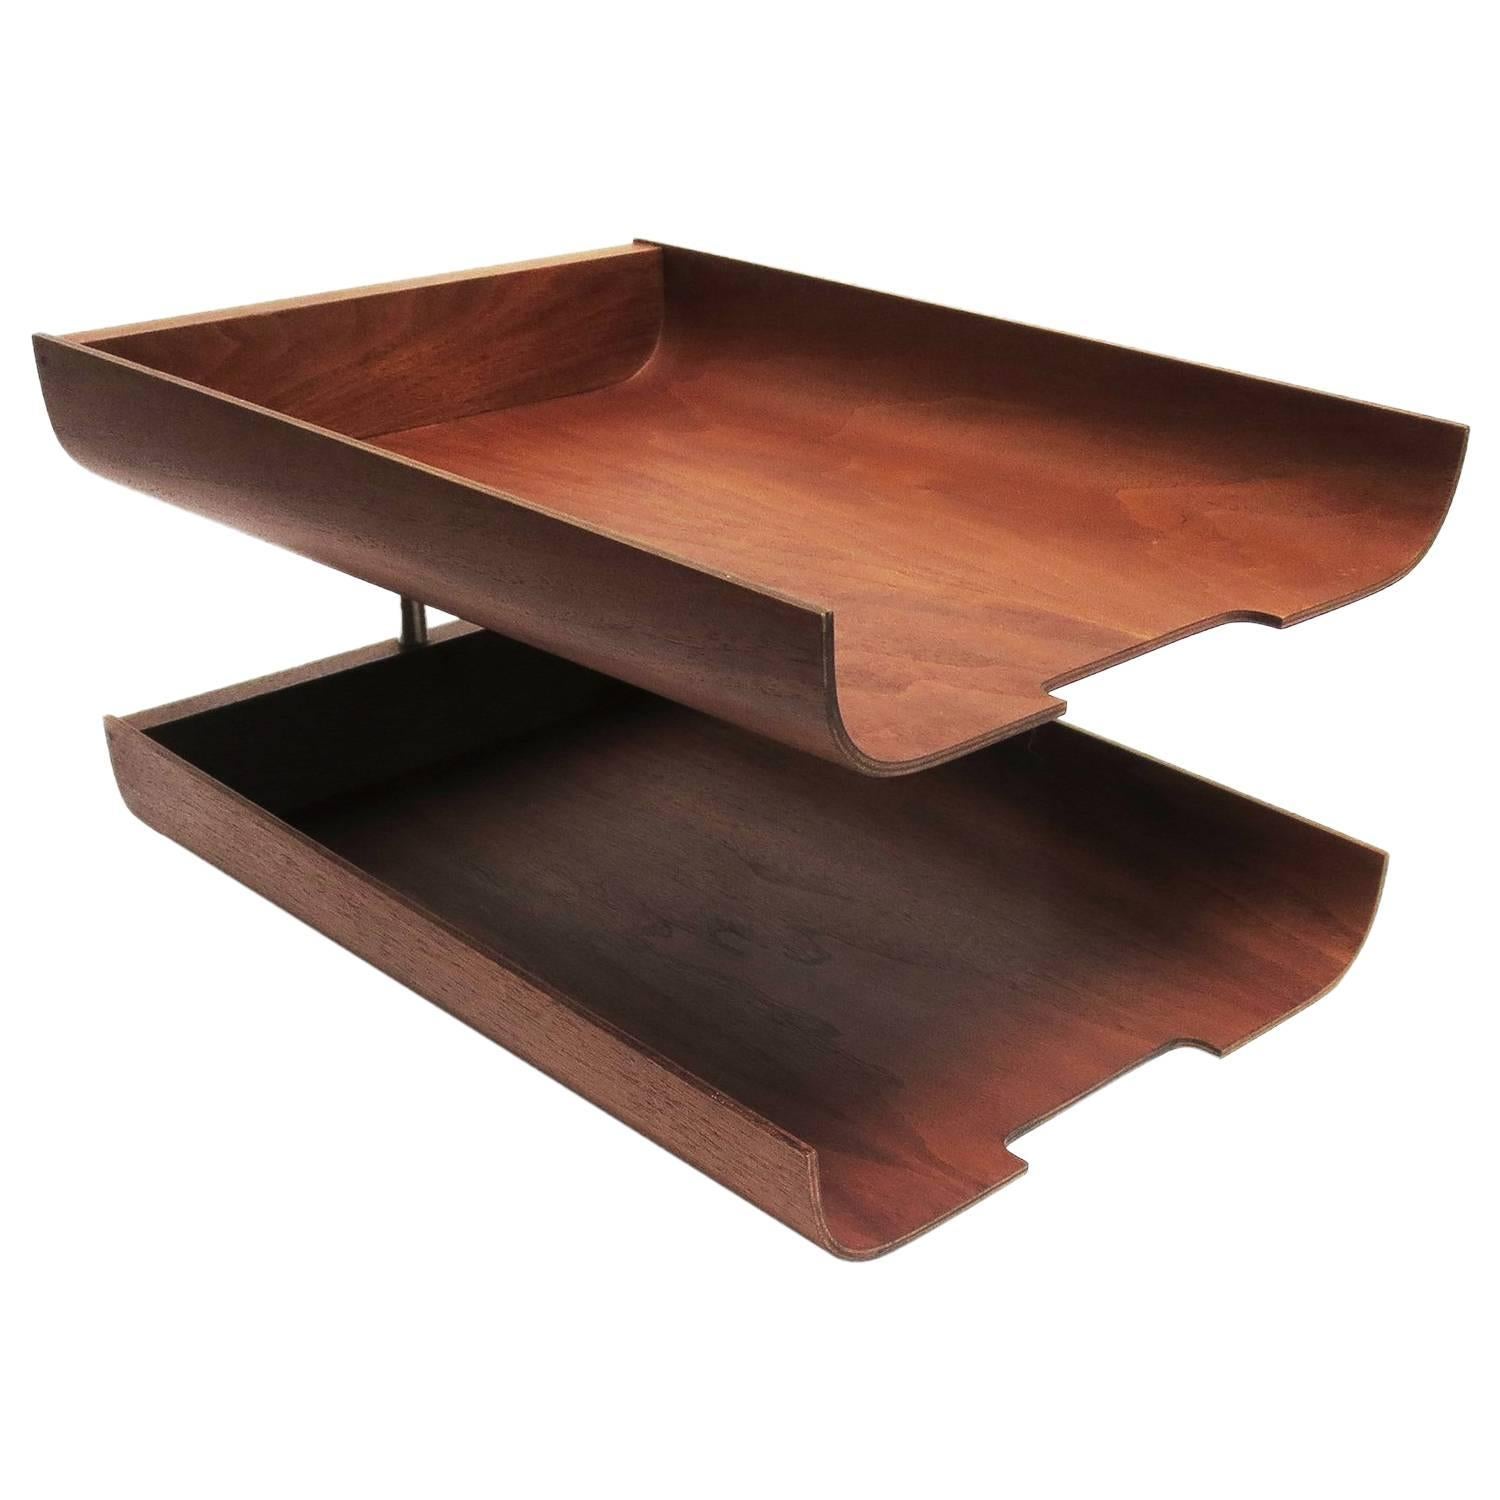 1960s Molded Teak Plywood Letter Trays by Martin Aberg for Rainbow Wood